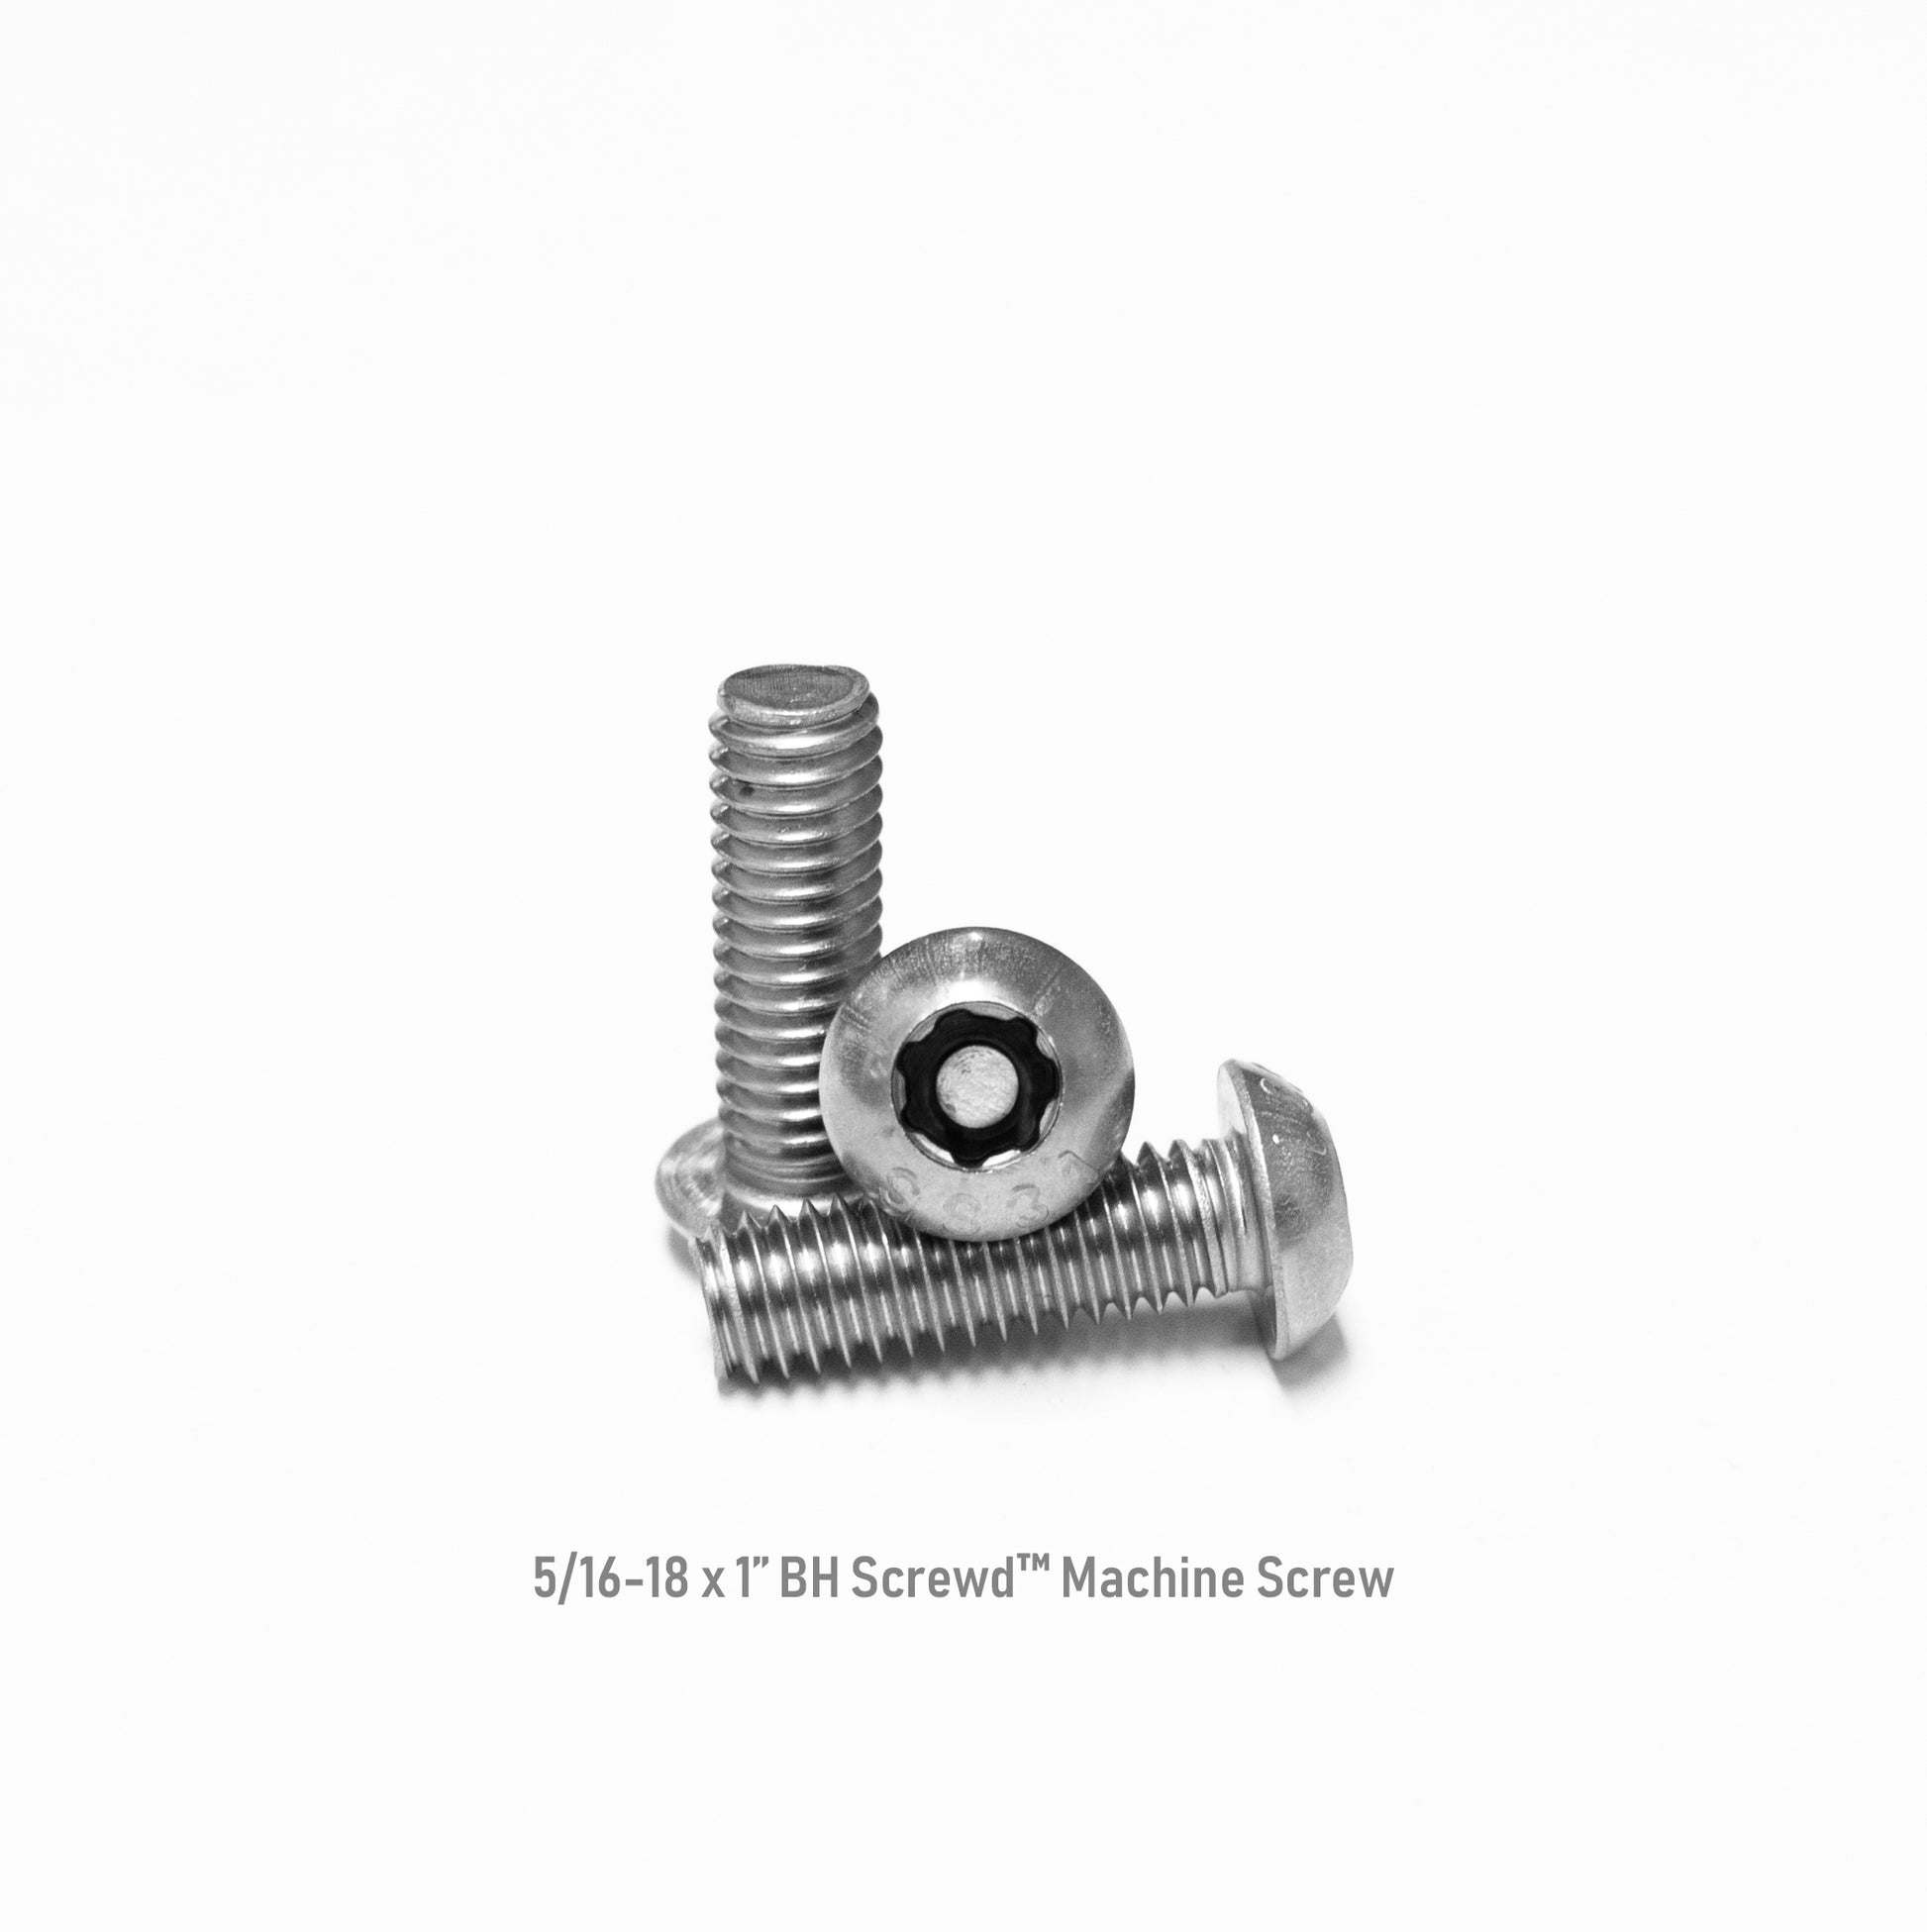 5/16-18 x 1" Button Head Screwd® Security  Machine Screw Made out of Stainless Steel